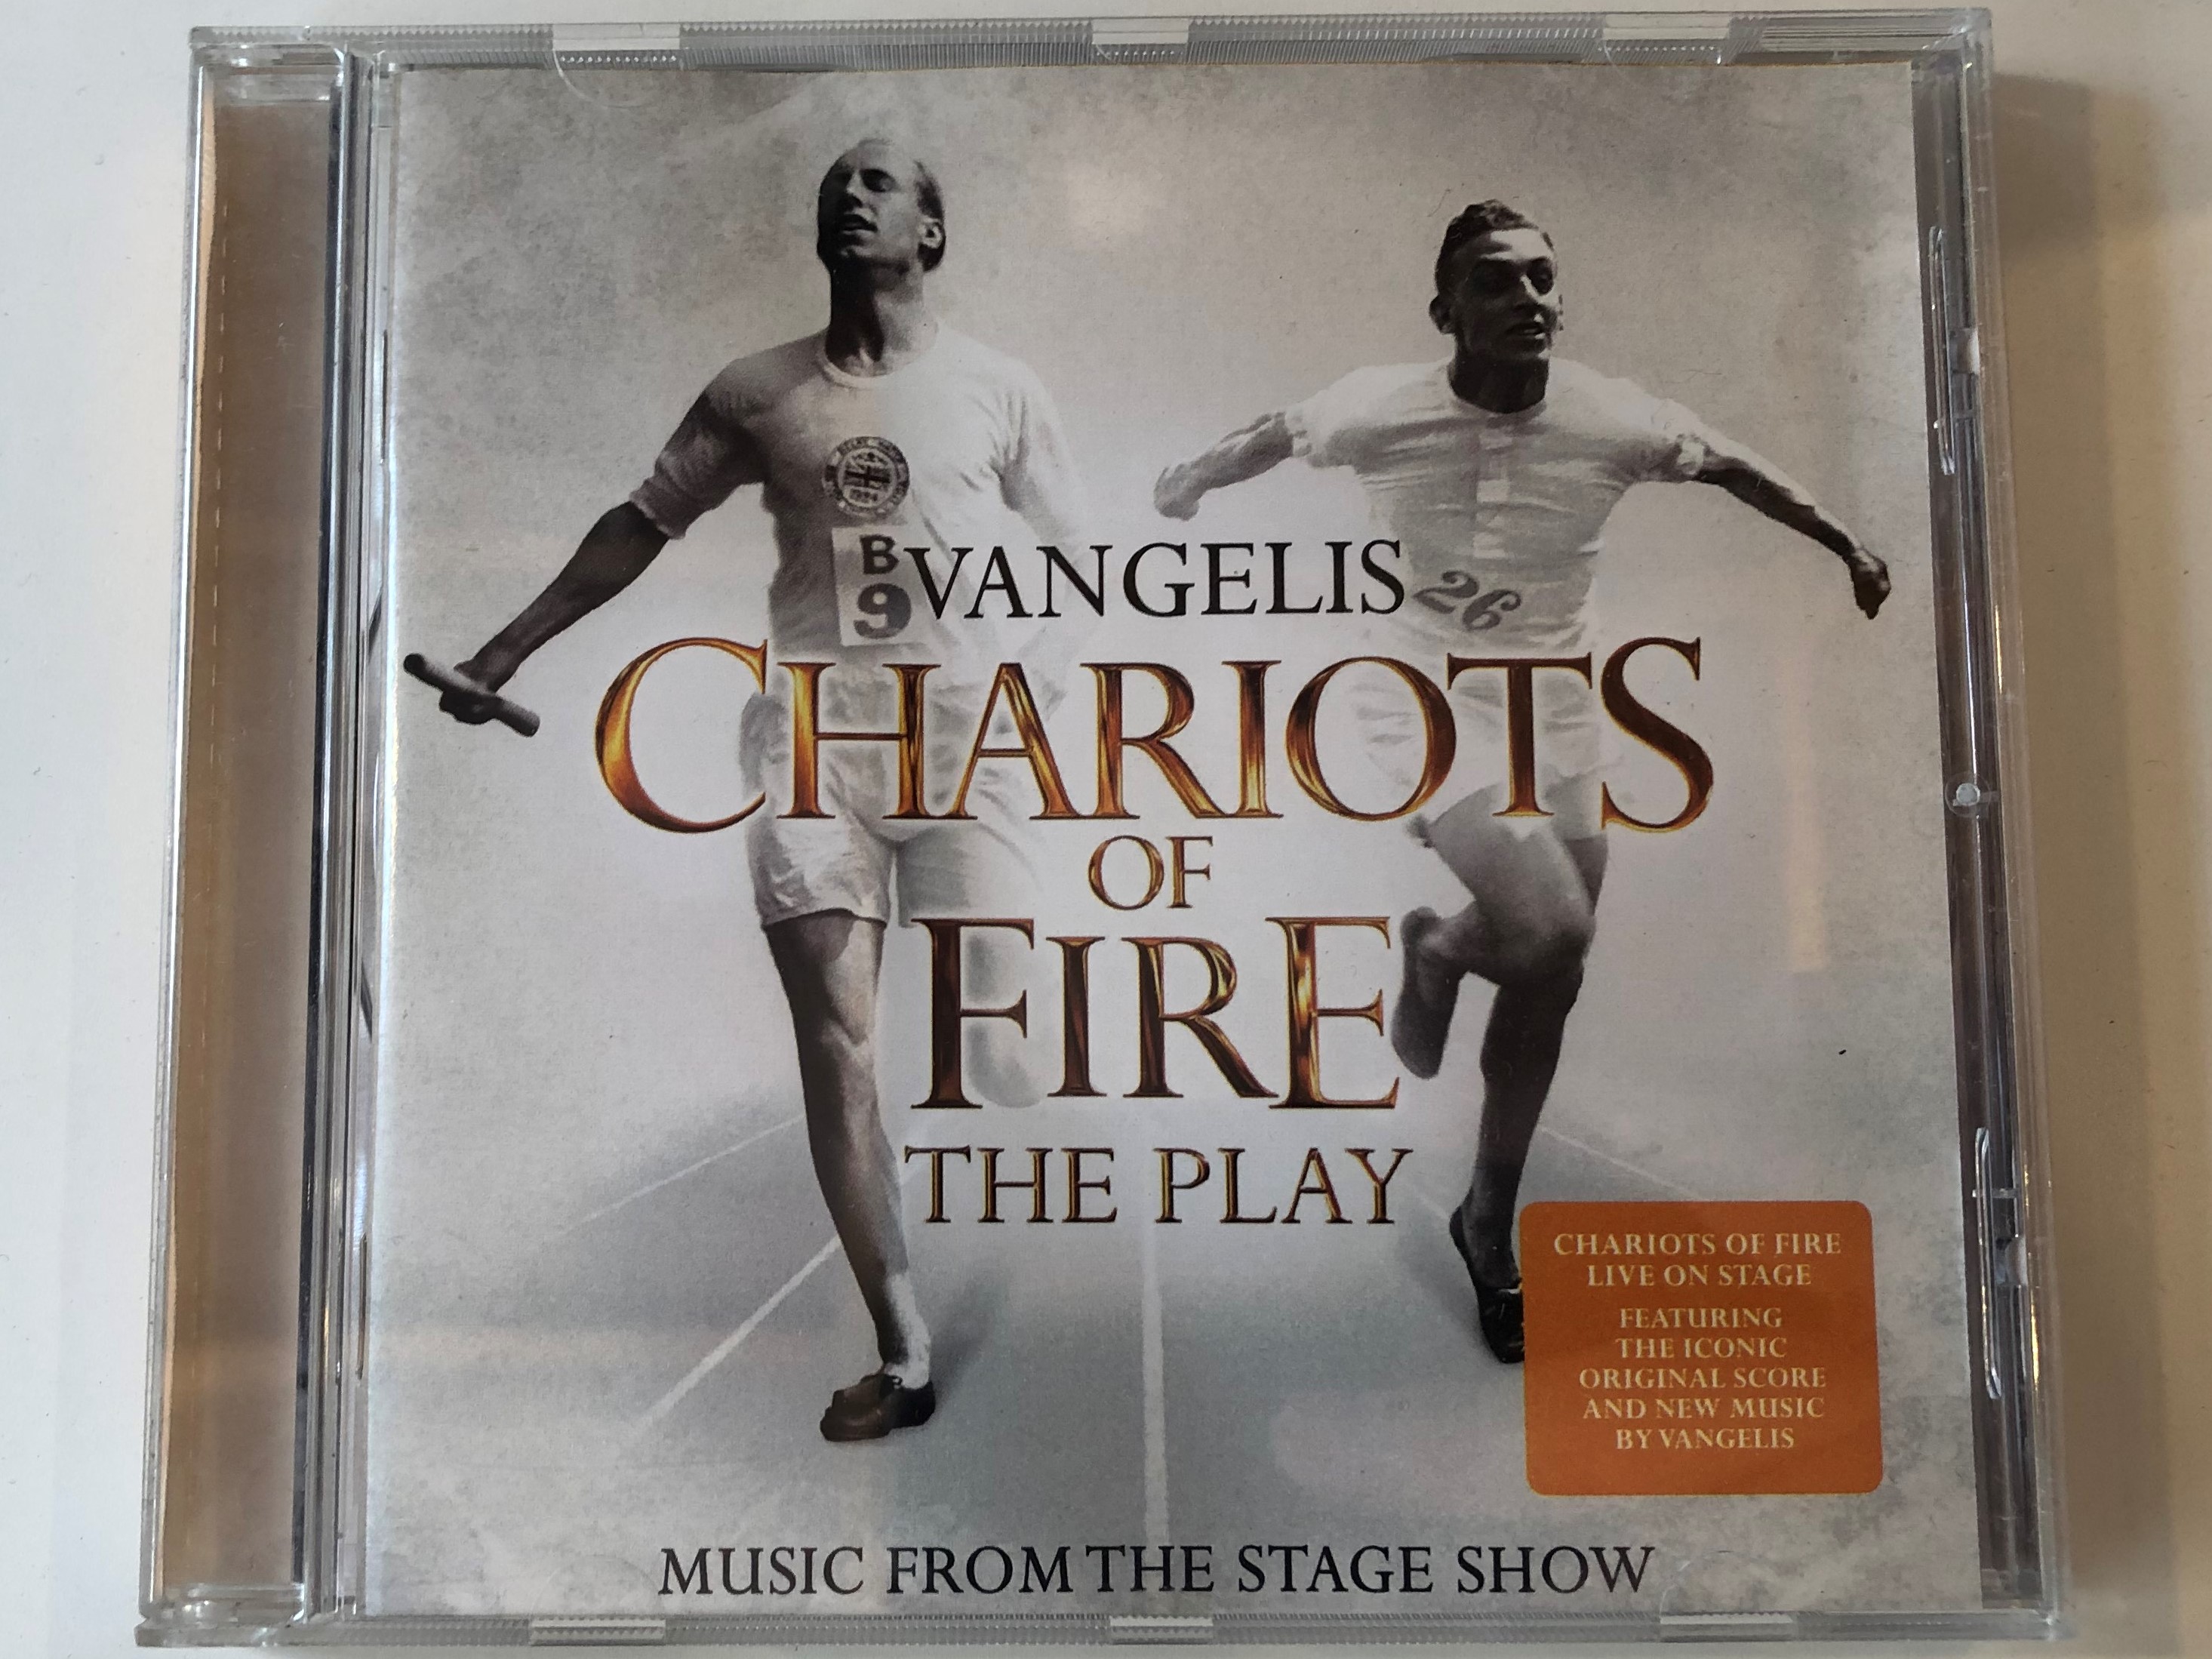 vangelis-chariots-of-fire-the-play-music-from-the-stage-show-featuring-the-iconic-original-score-and-new-music-by-vangelis-decca-audio-cd-2012-3710285-1-.jpg